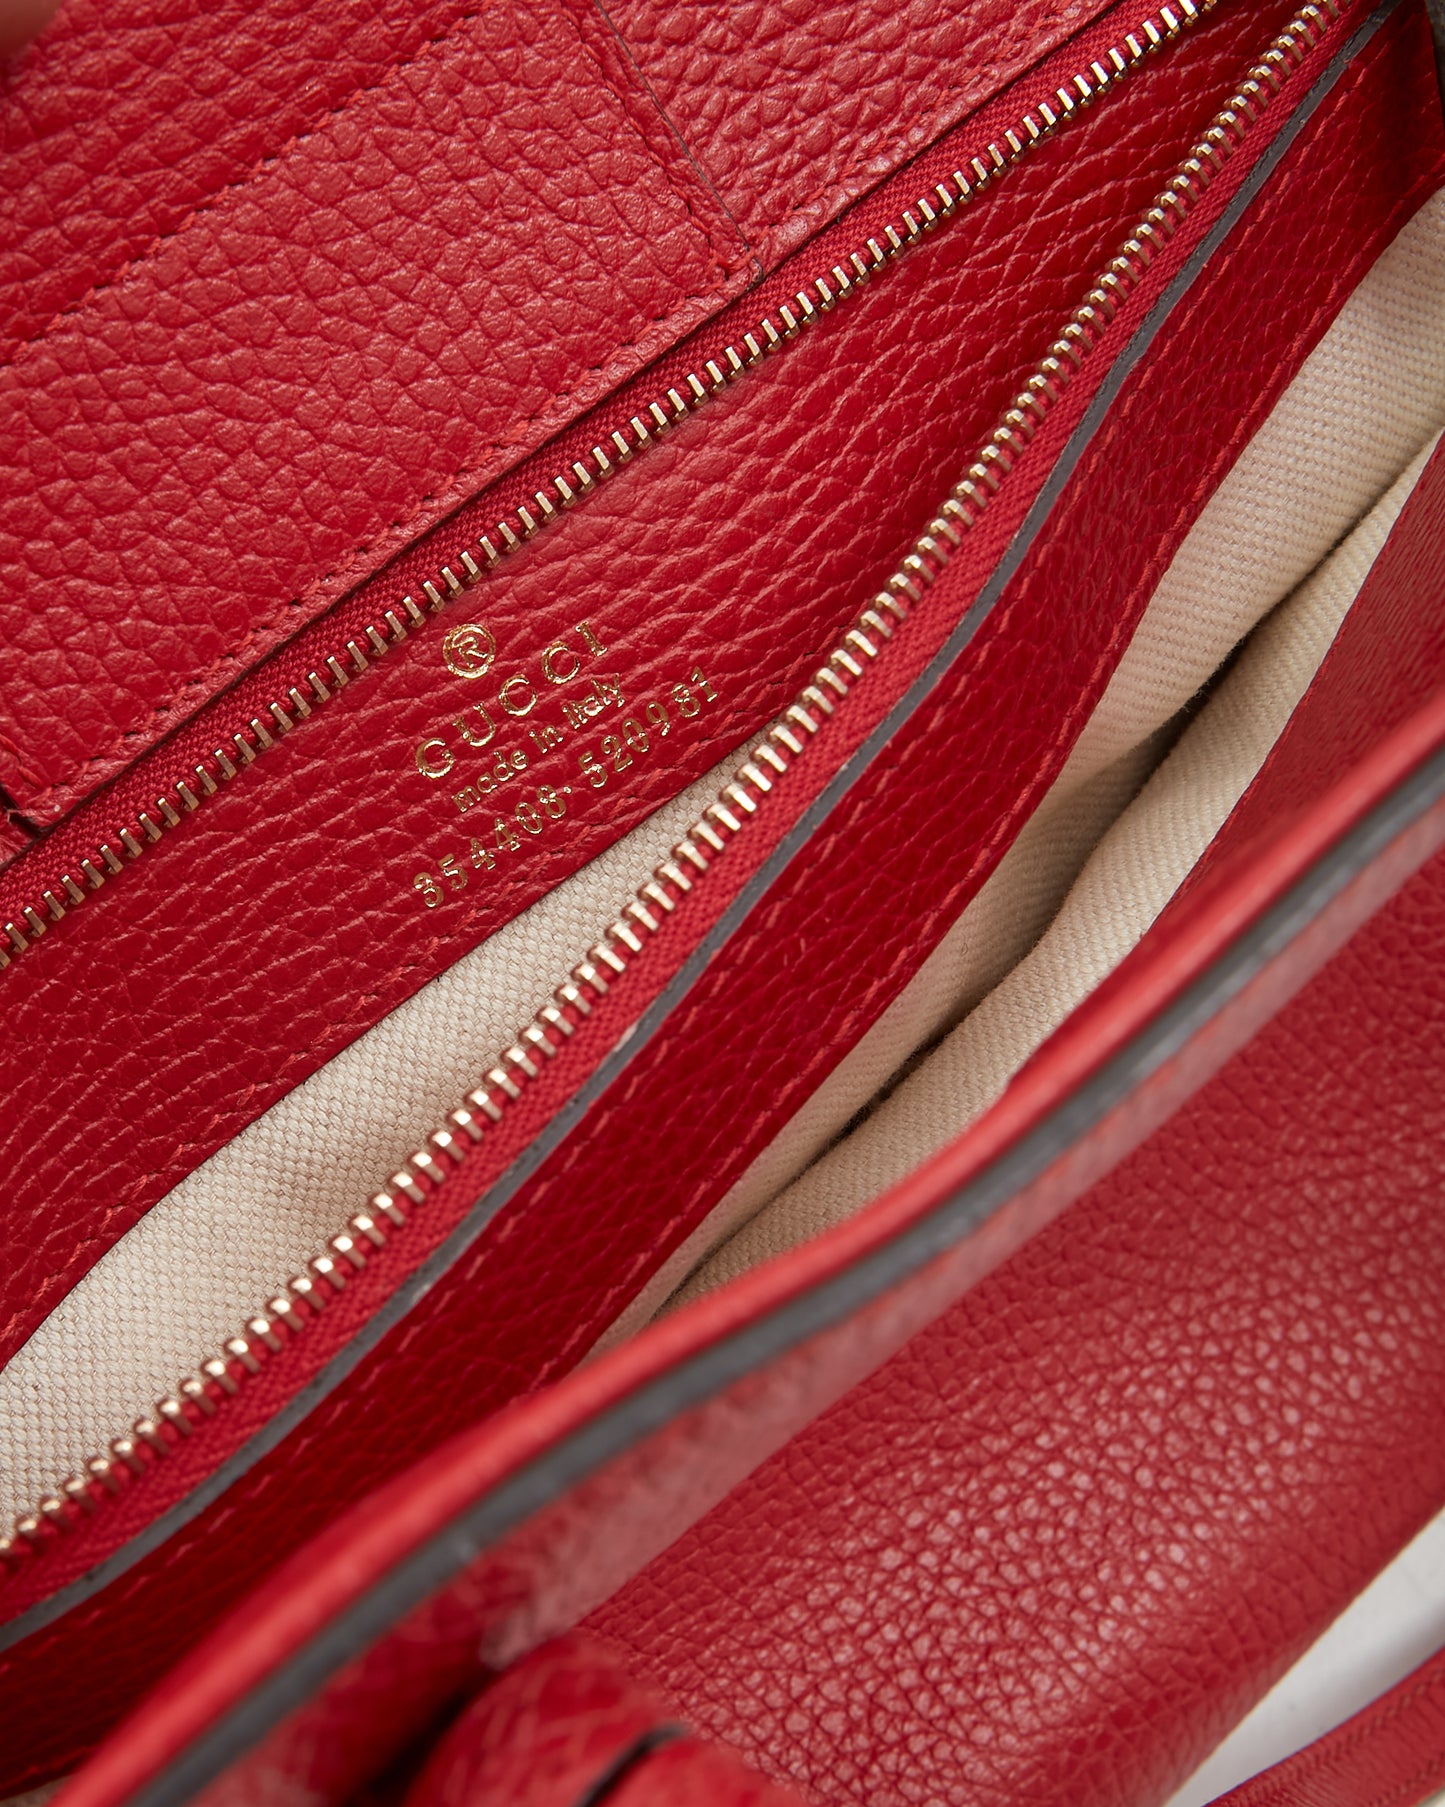 Gucci Red Pebbled Leather Small Swing Tote Bag